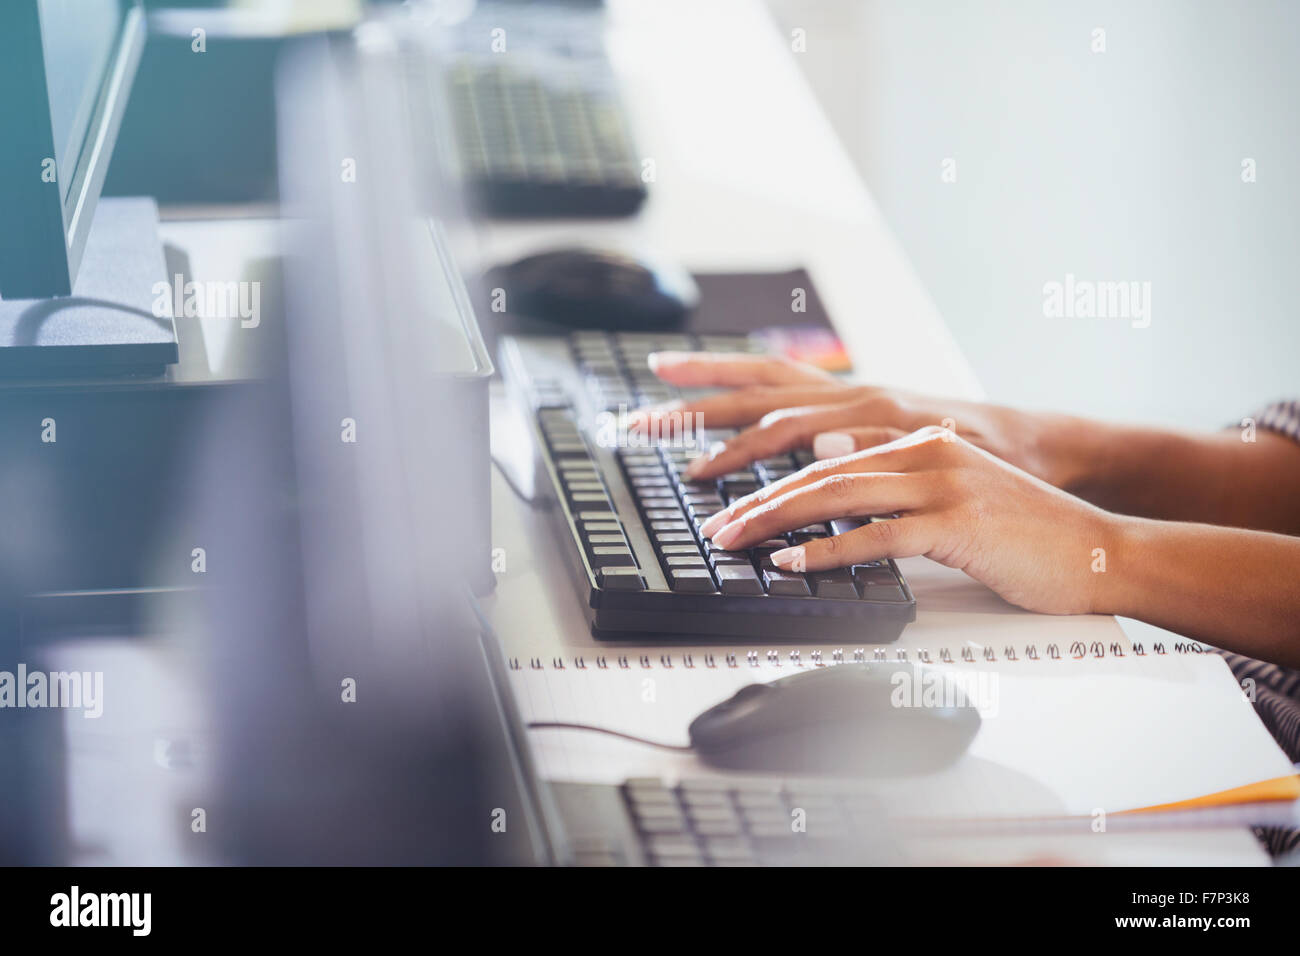 Student typing on computer keyboard in adult education classroom Stock Photo